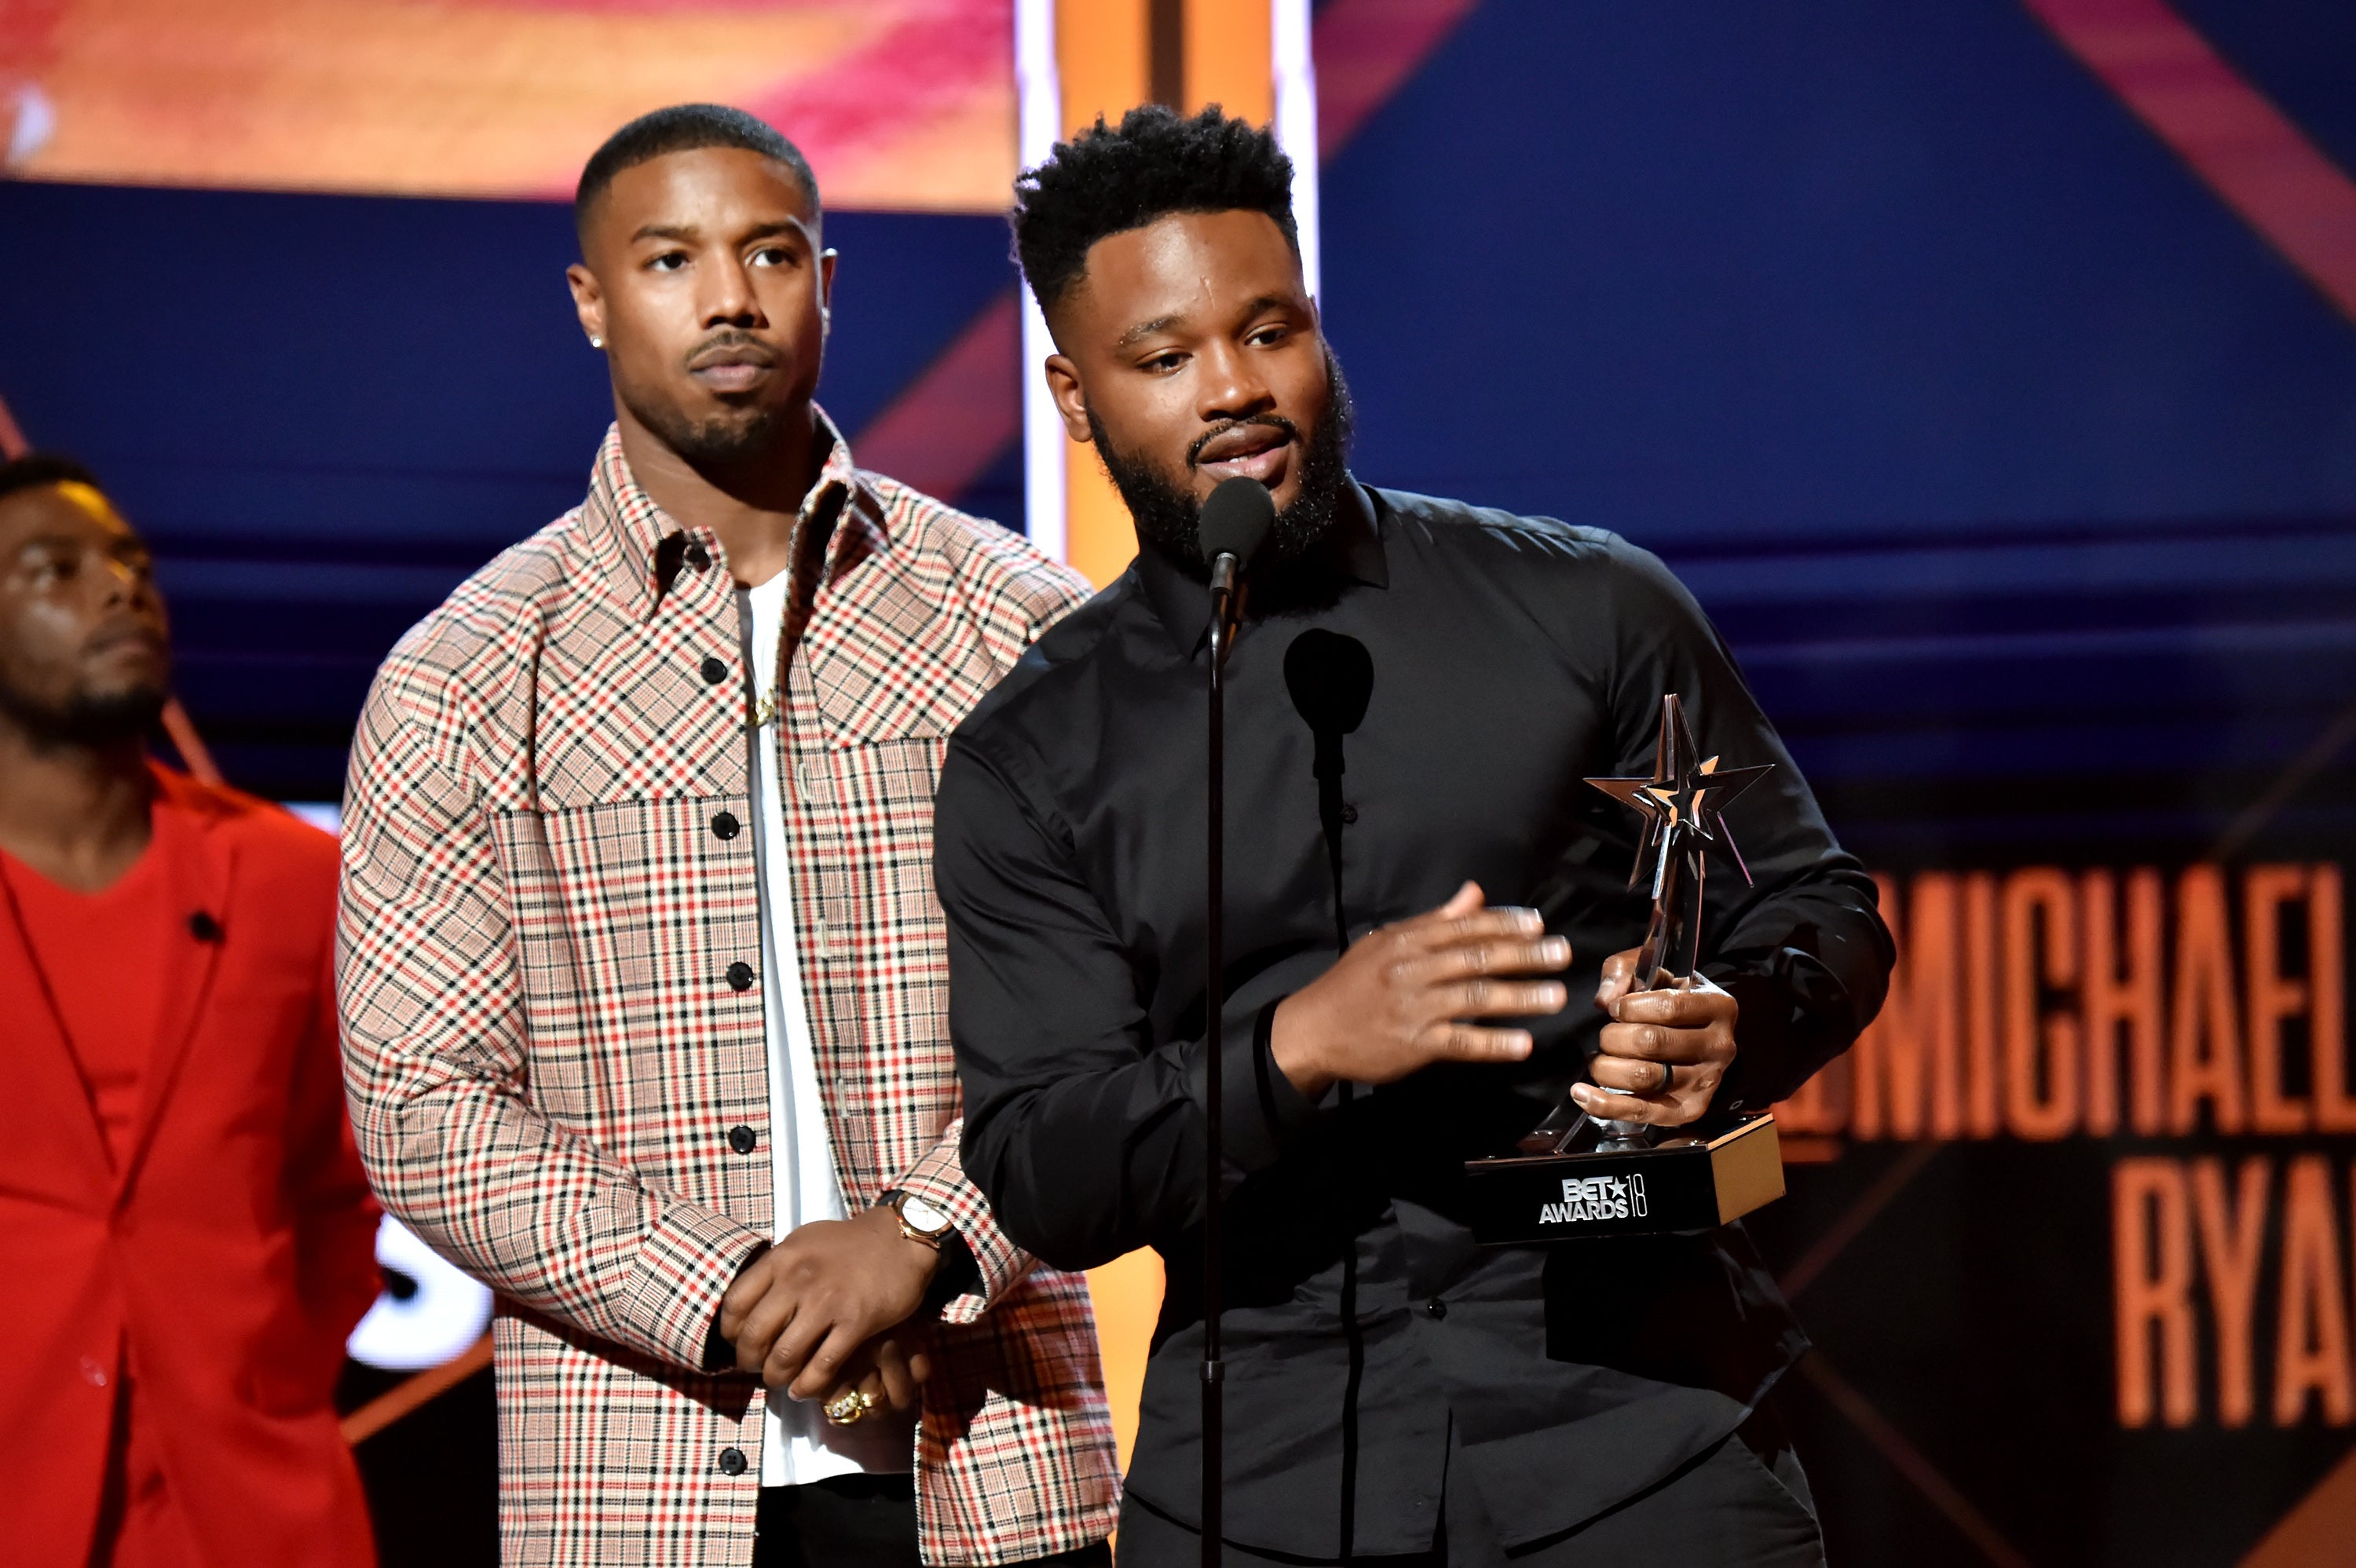 Take Ryan Coogler's Advice For Your Next Trip: 'If You Can Travel To Africa, Go'
